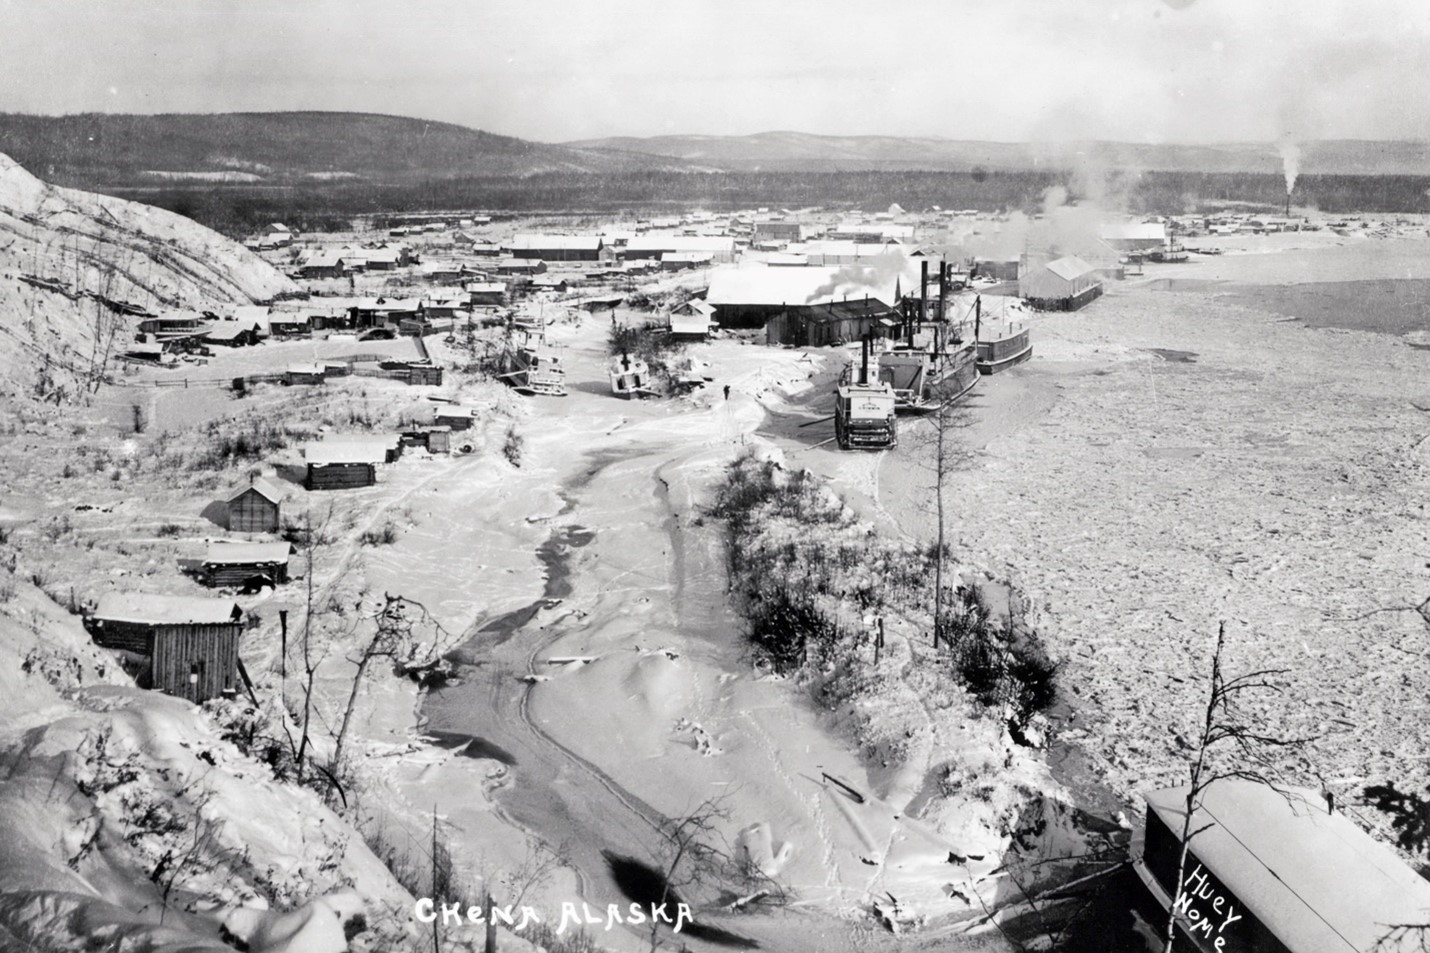 Aerial view of steamboats moored on shoreline of river in winter time.